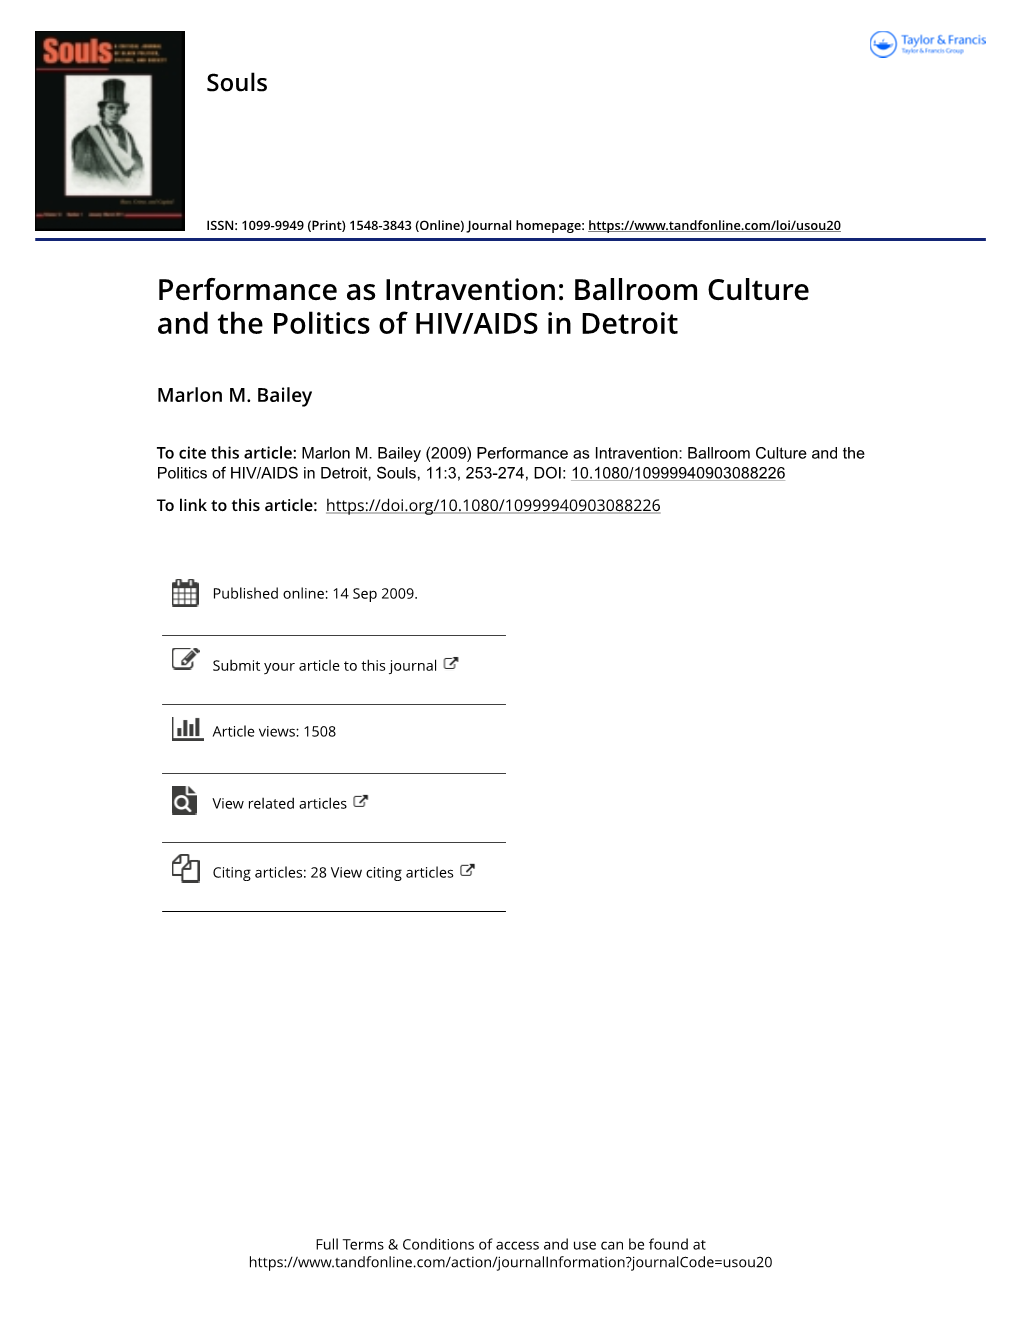 Performance As Intravention: Ballroom Culture and the Politics of HIV/AIDS in Detroit